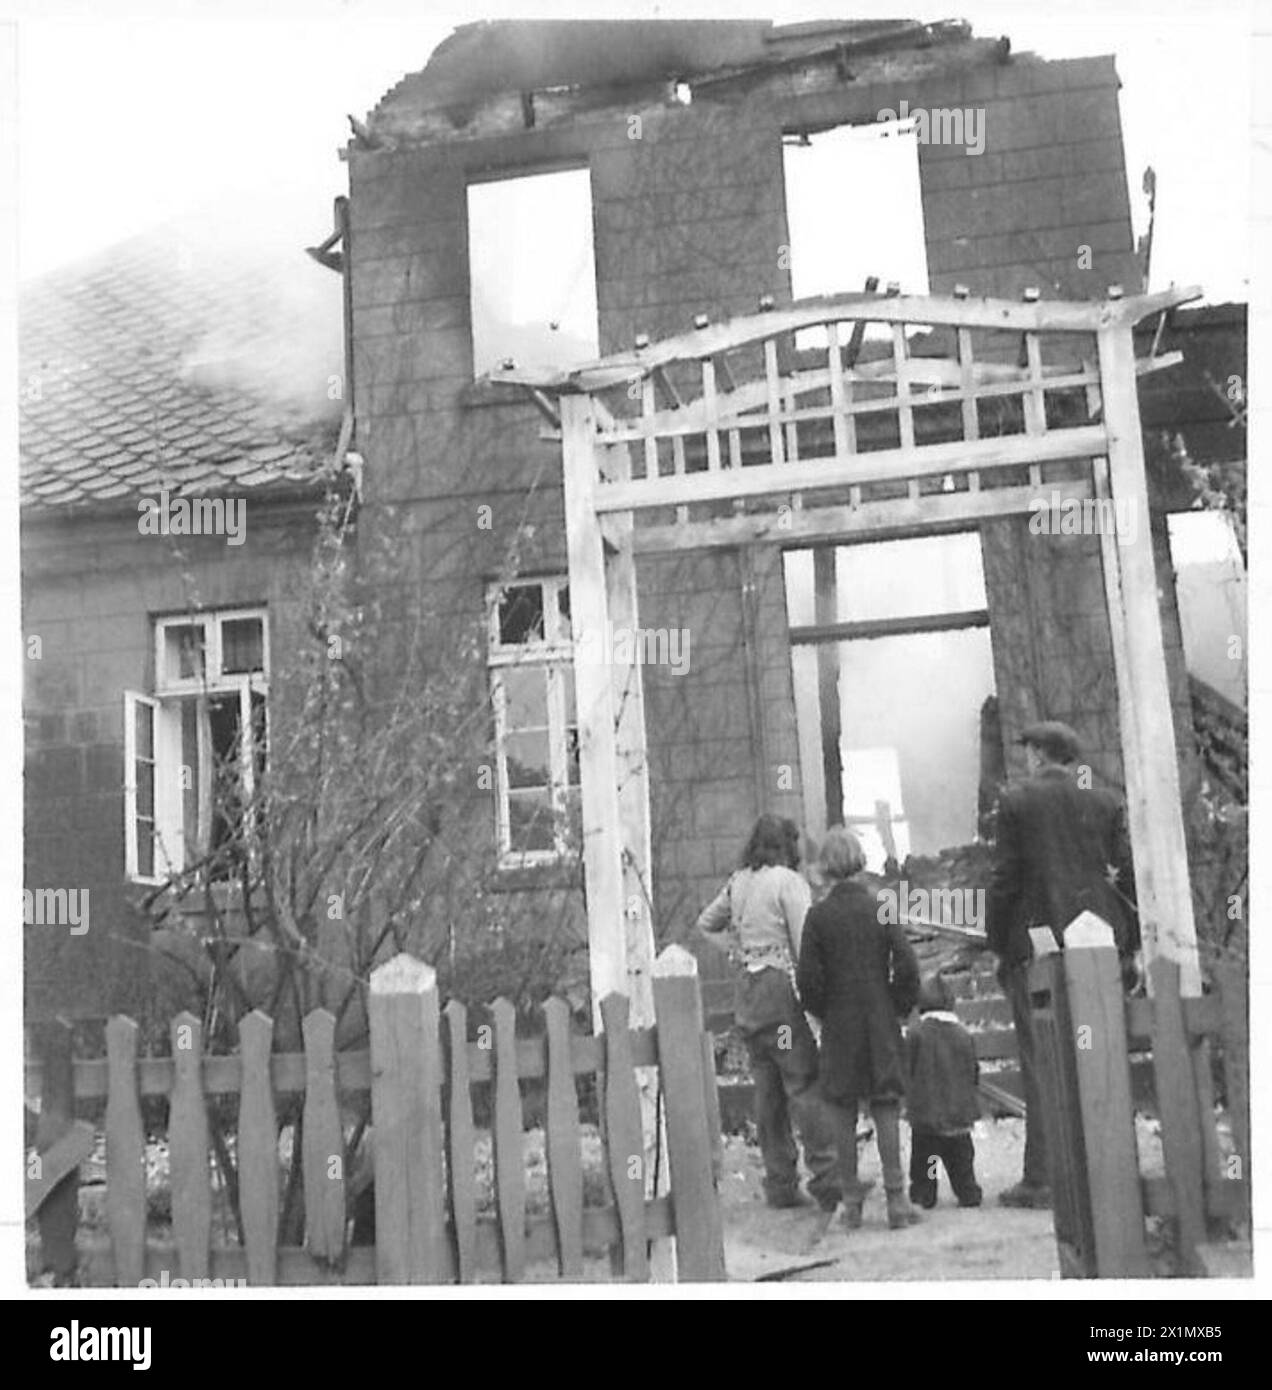 ADVANCE OF THE 5TH GUARDS ARMOURED BRIGADE - German civilians watch their home burn, in the village of Freren, after it had been fired by the Gestapo, British Army, 21st Army Group Stock Photo